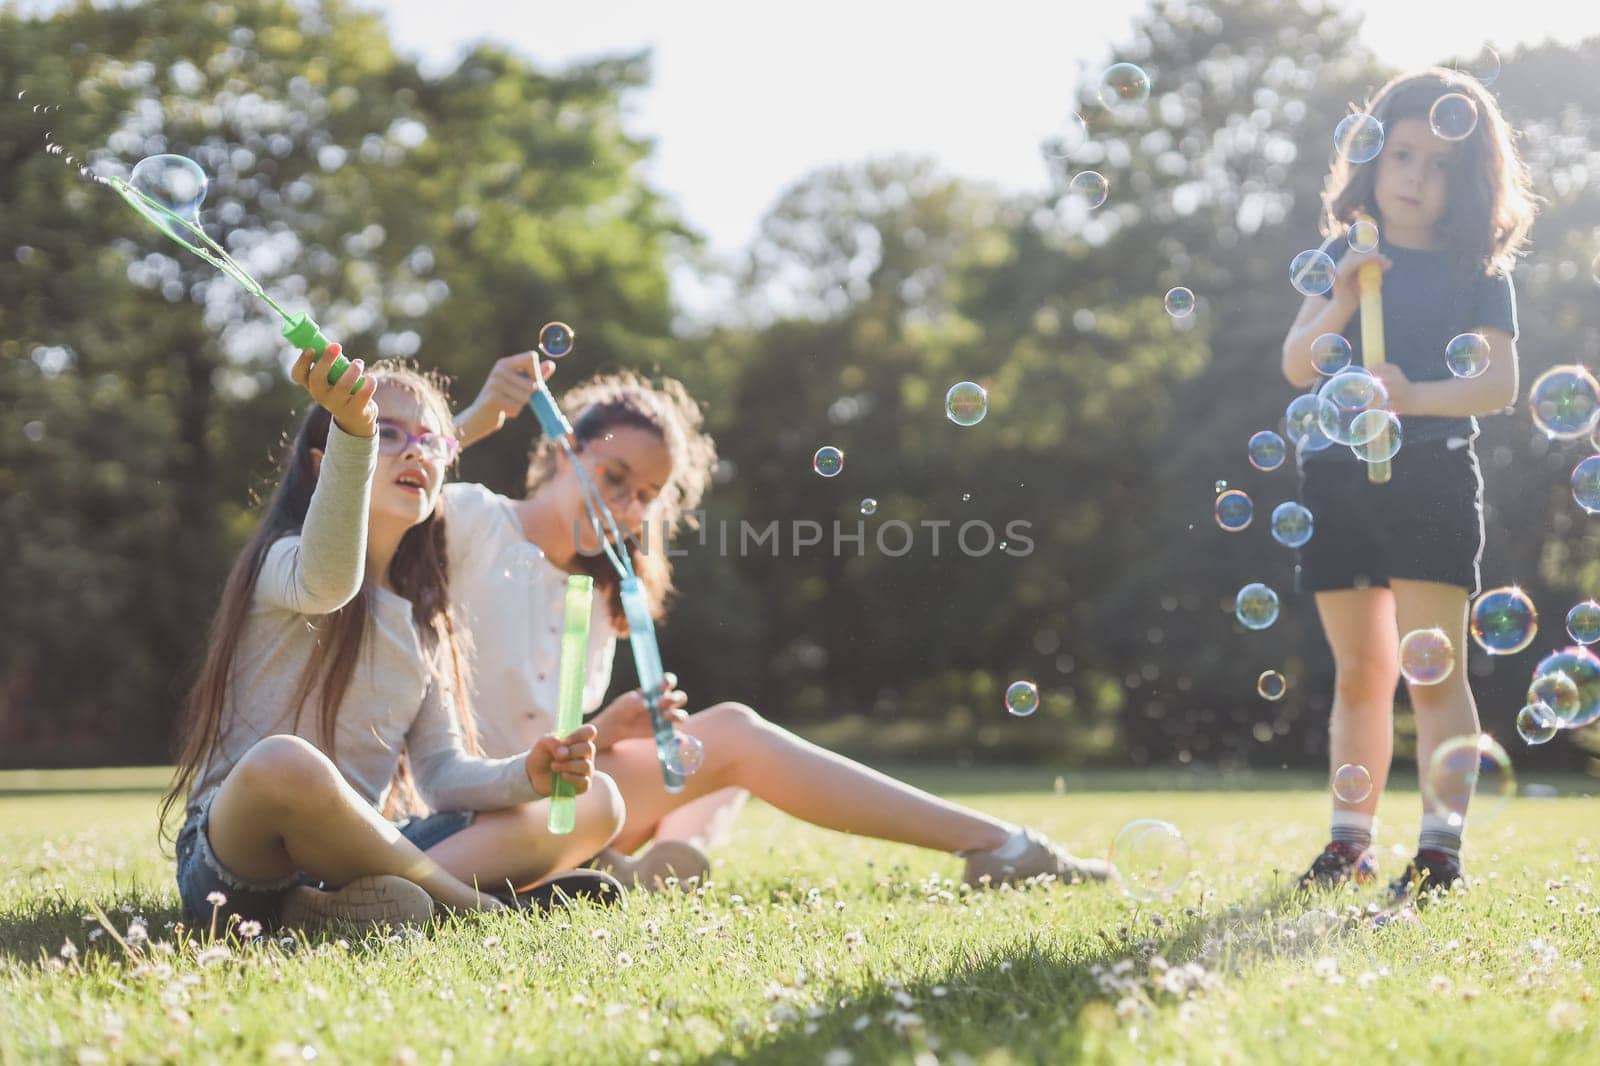 Three beautiful caucasian girls sisters are sitting on a flower lawn in a public park and blowing soap bubbles in the backlight with a blurred background, close-up side view. PARKS REC concept, happy childhood, children picnic,holidays,children recreation,outdoors.